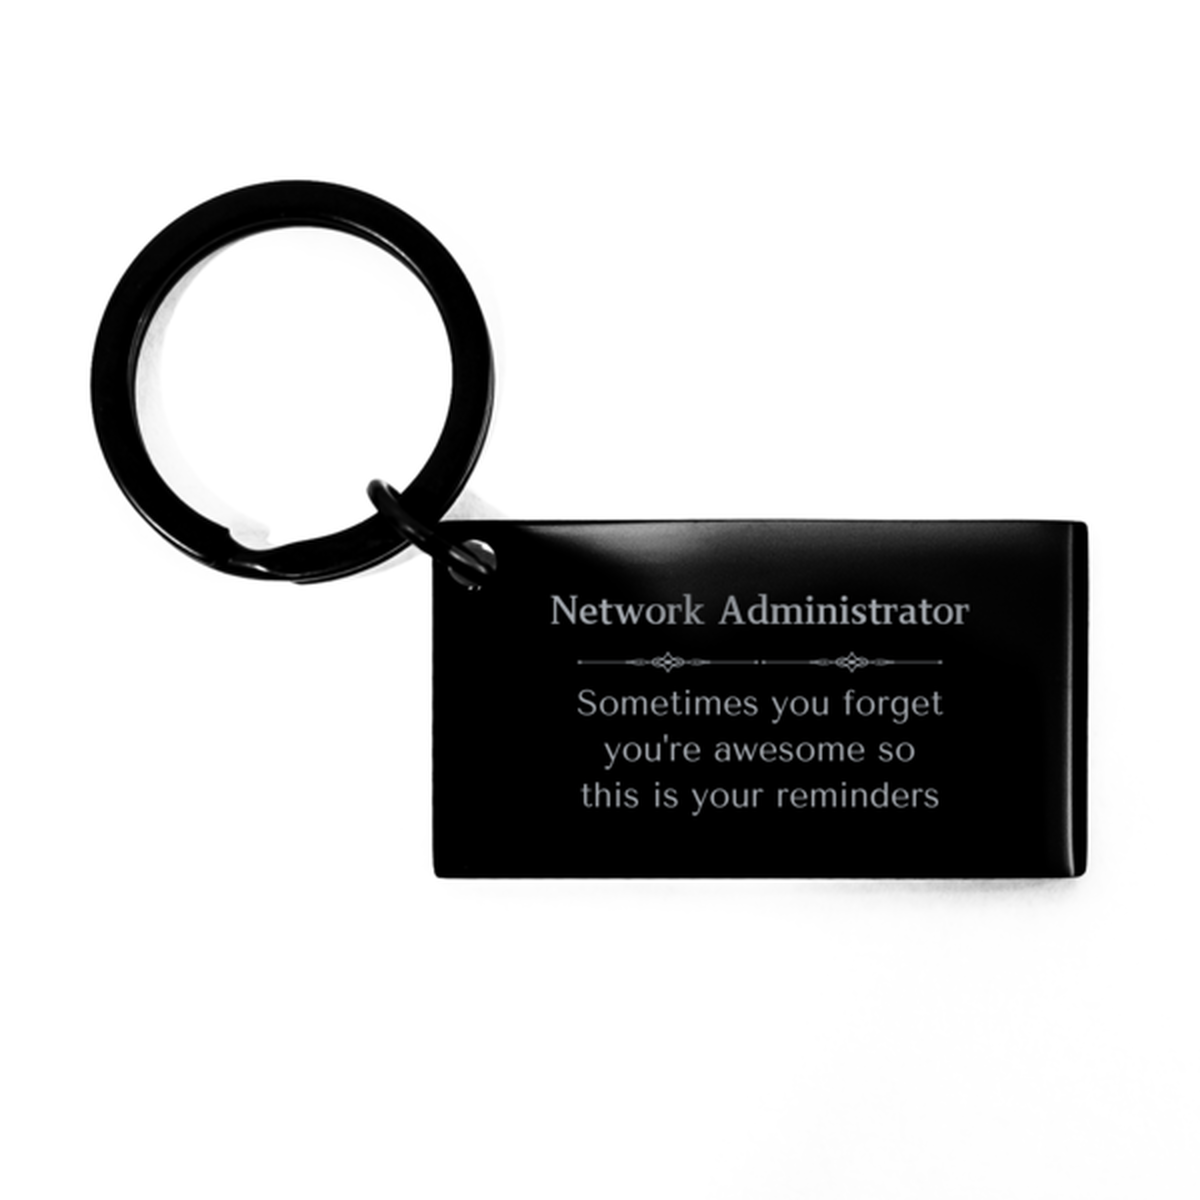 Sentimental Network Administrator Keychain, PE Teacher Sometimes you forget you're awesome so this is your reminders, Graduation Christmas Birthday Gifts for Network Administrator, Men, Women, Coworkers